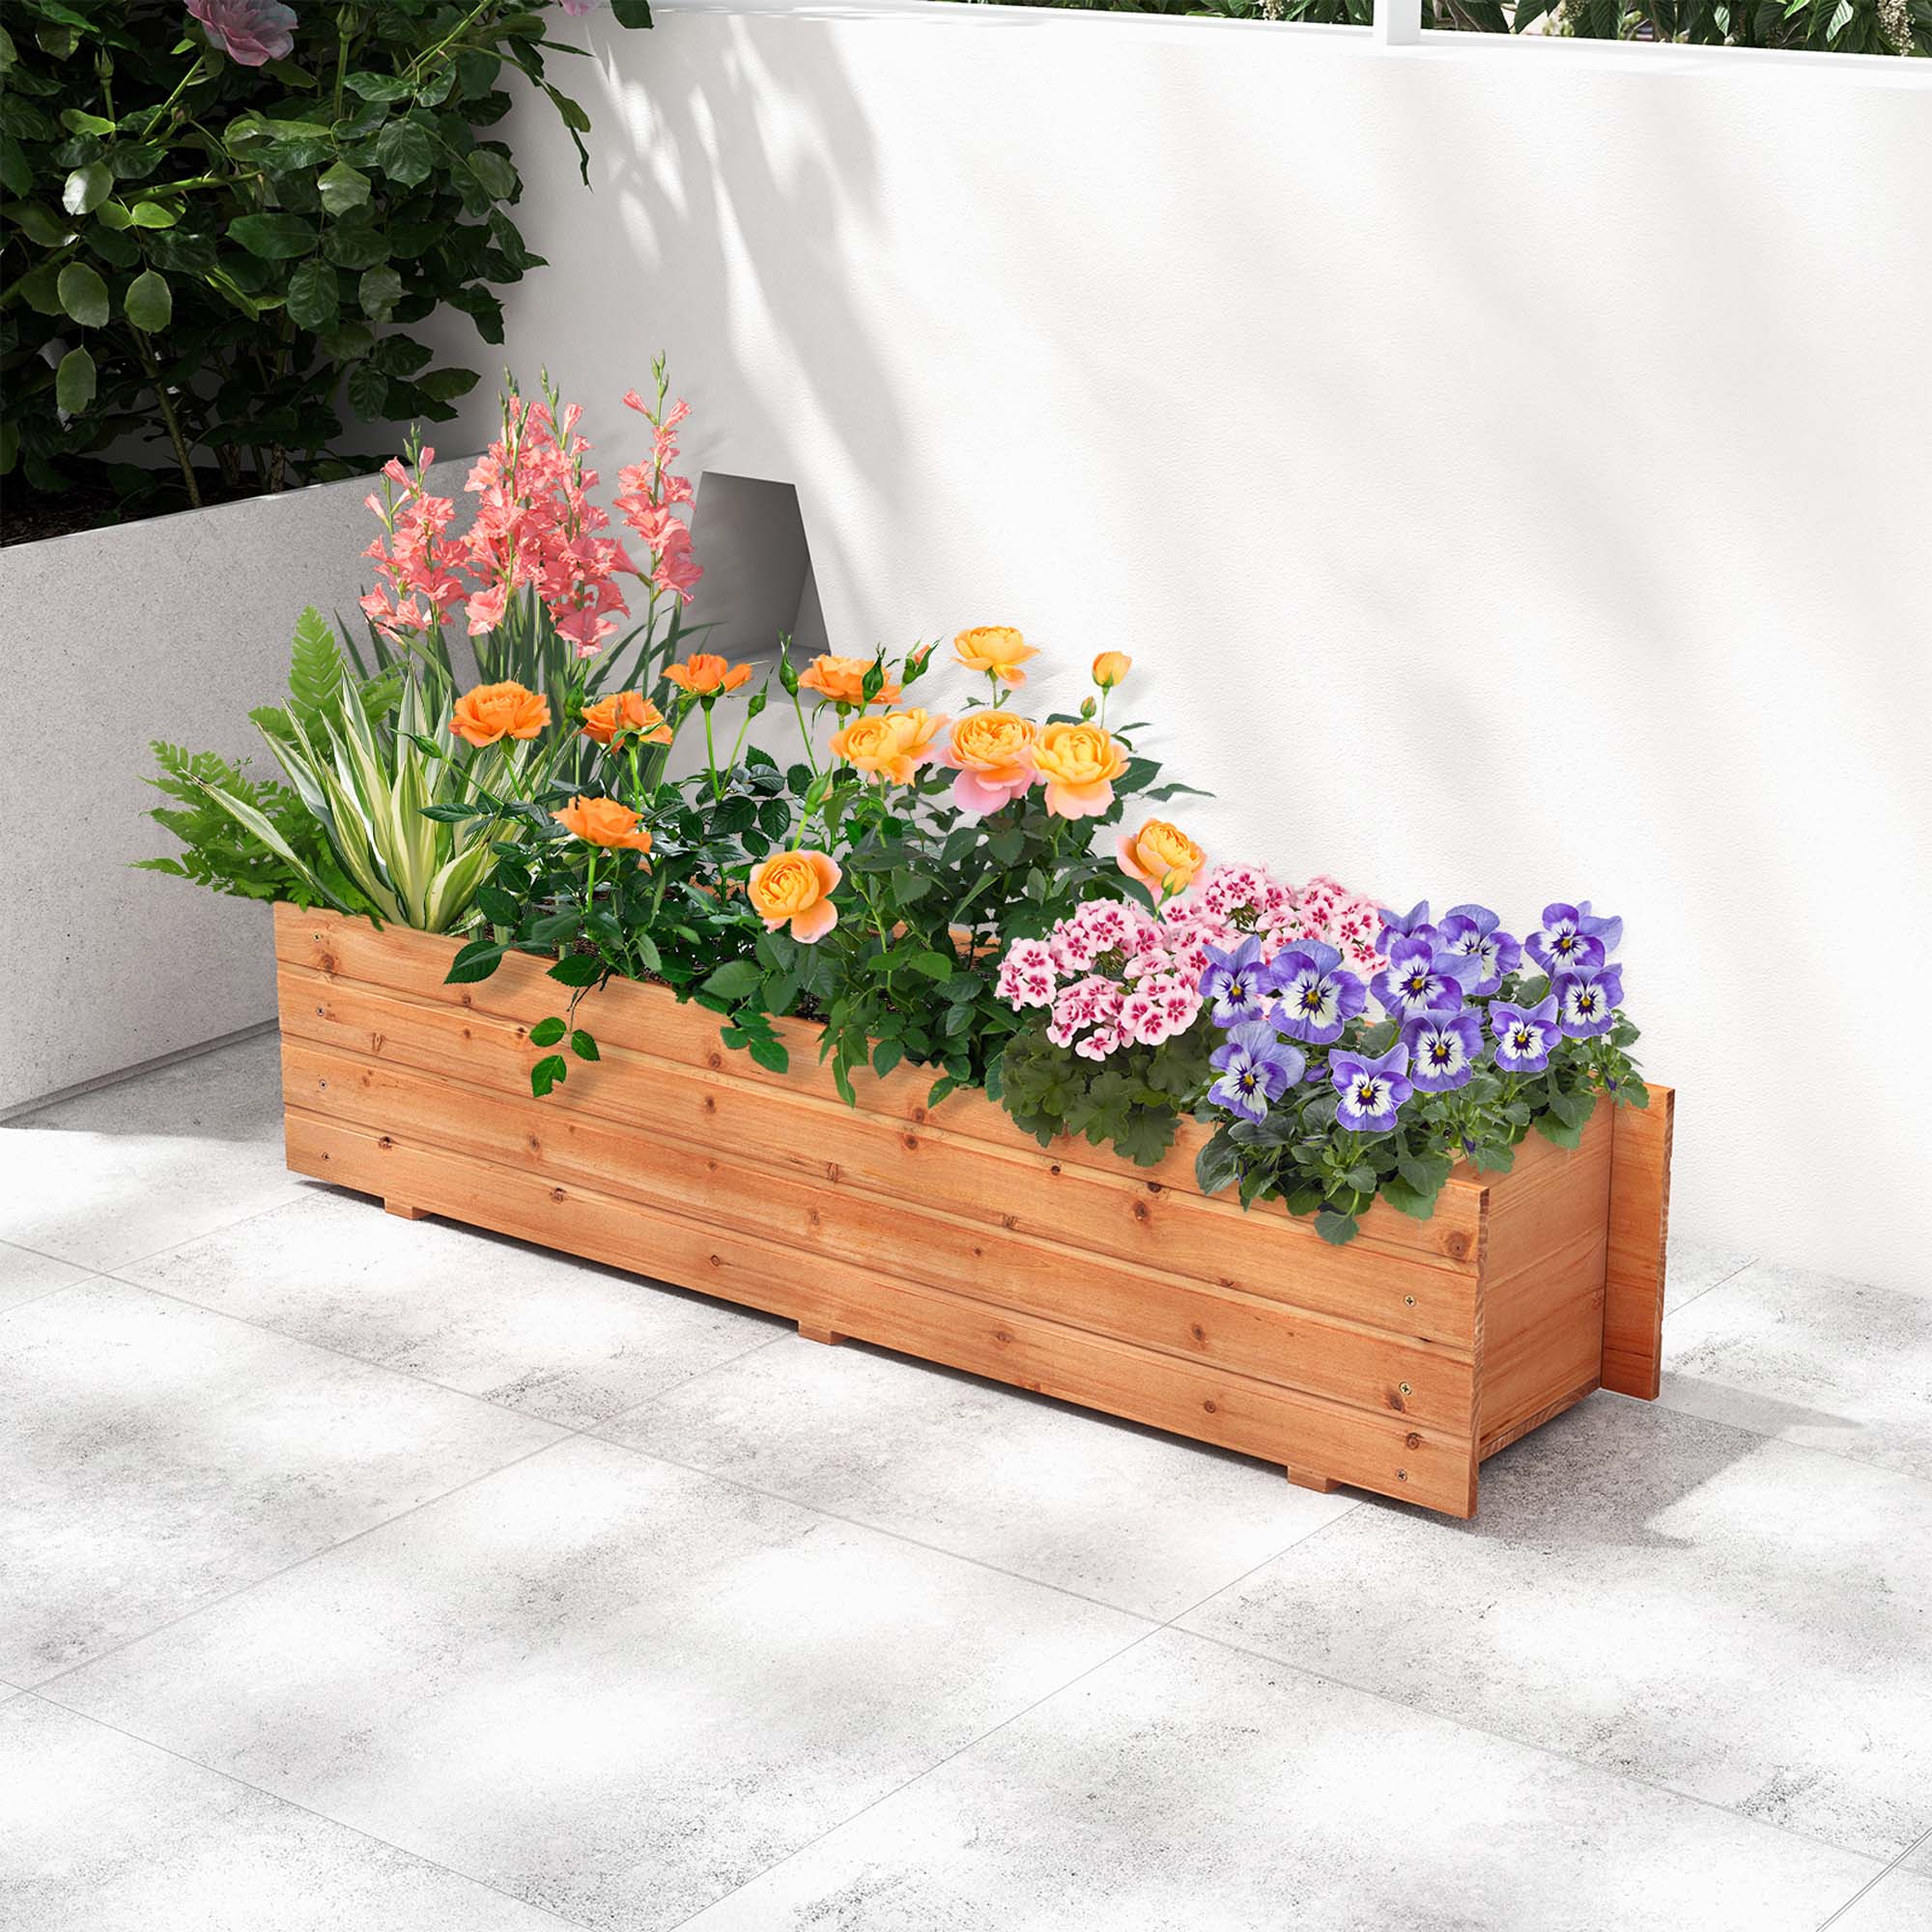 Costway Raised Garden Bed Wood Rectangular Planter Box with 2 Drainage Holes Outdoor - image 2 of 10